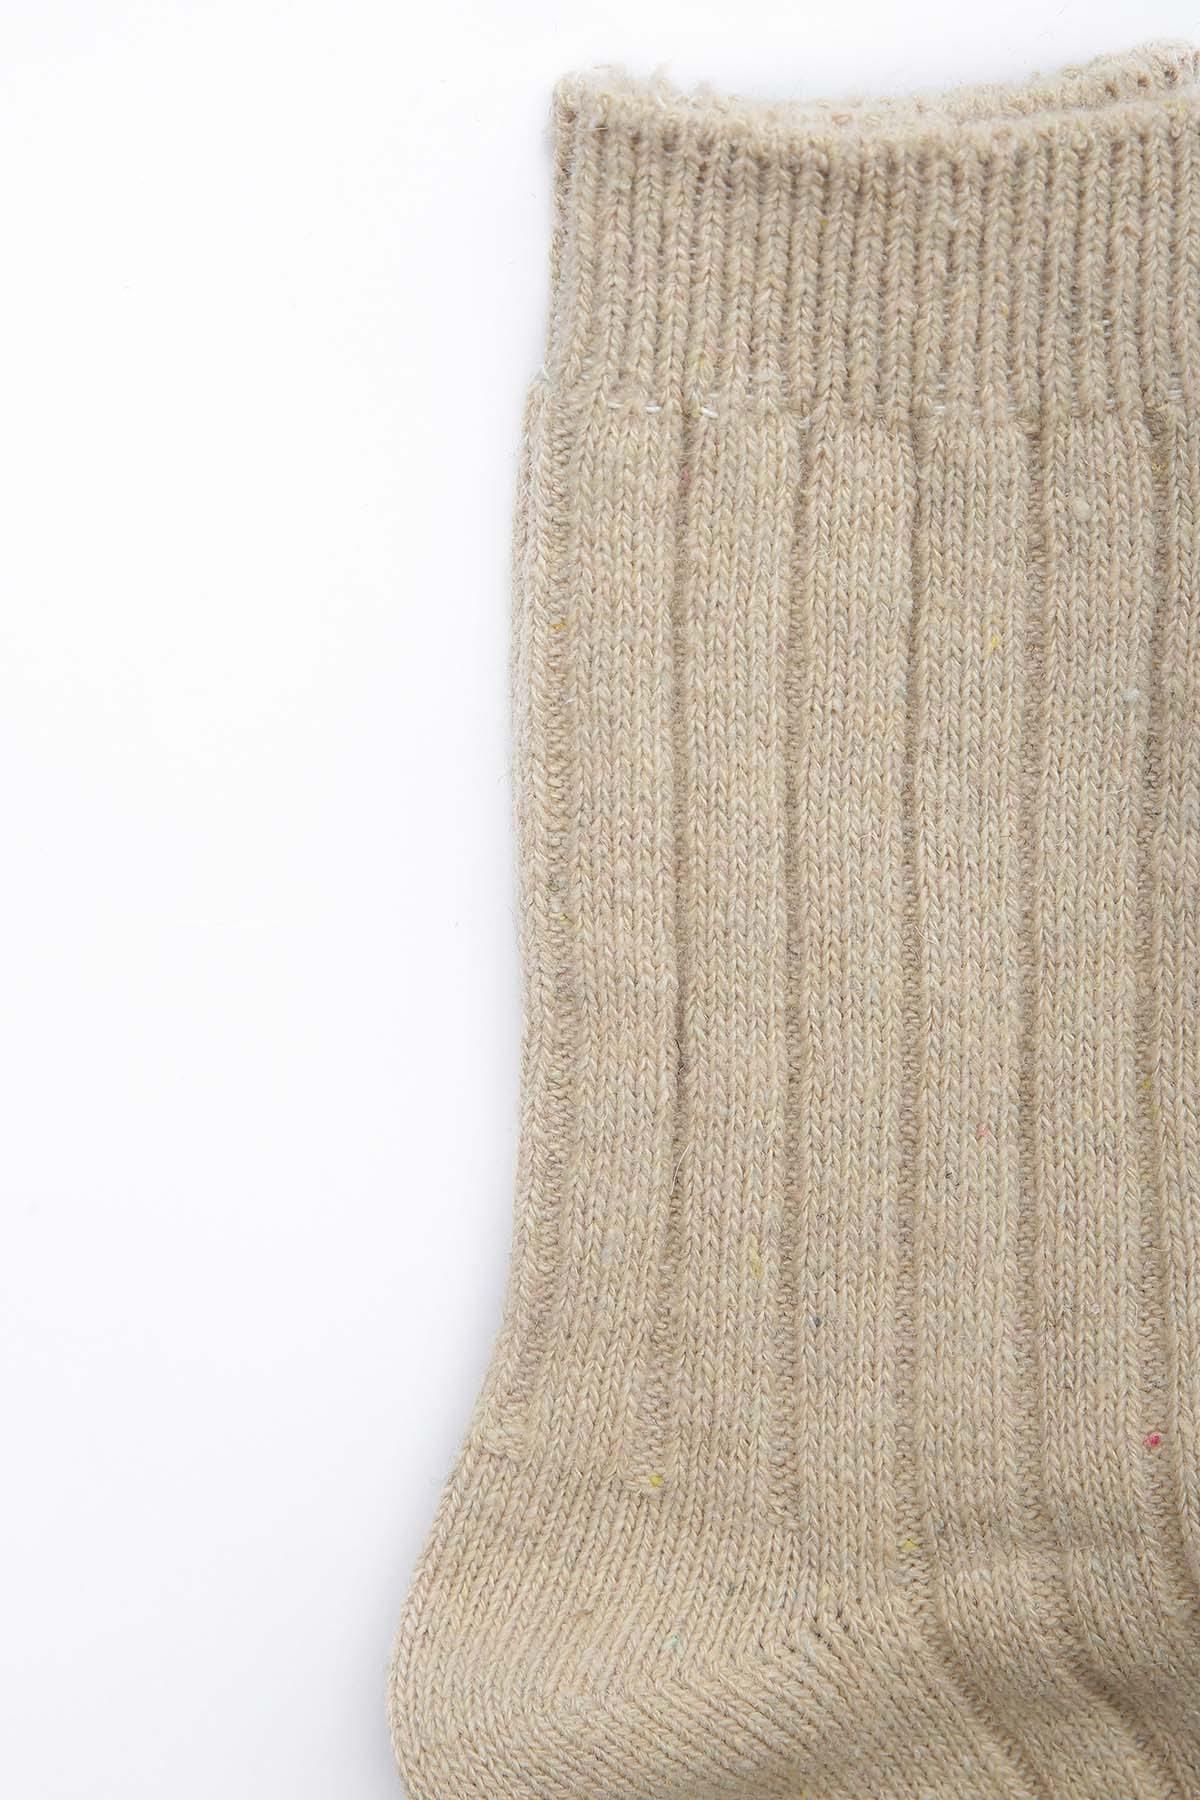 WOOLEN SOCK at Charcoal Clothing